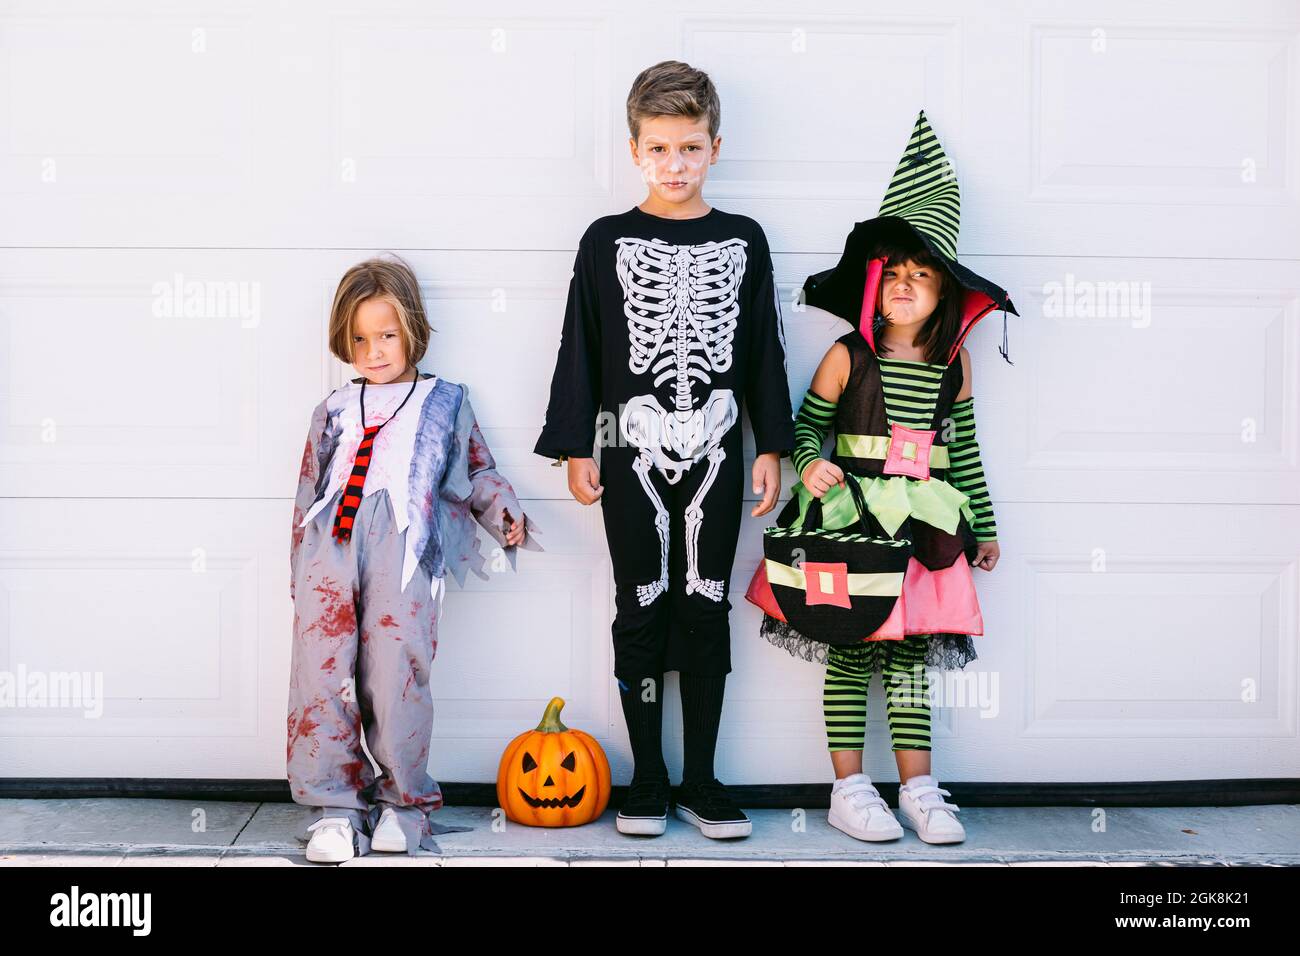 Full body of group of little kids dressed in various Halloween costumes  with carved Jack O Lantern standing near white wall on street Stock Photo -  Alamy